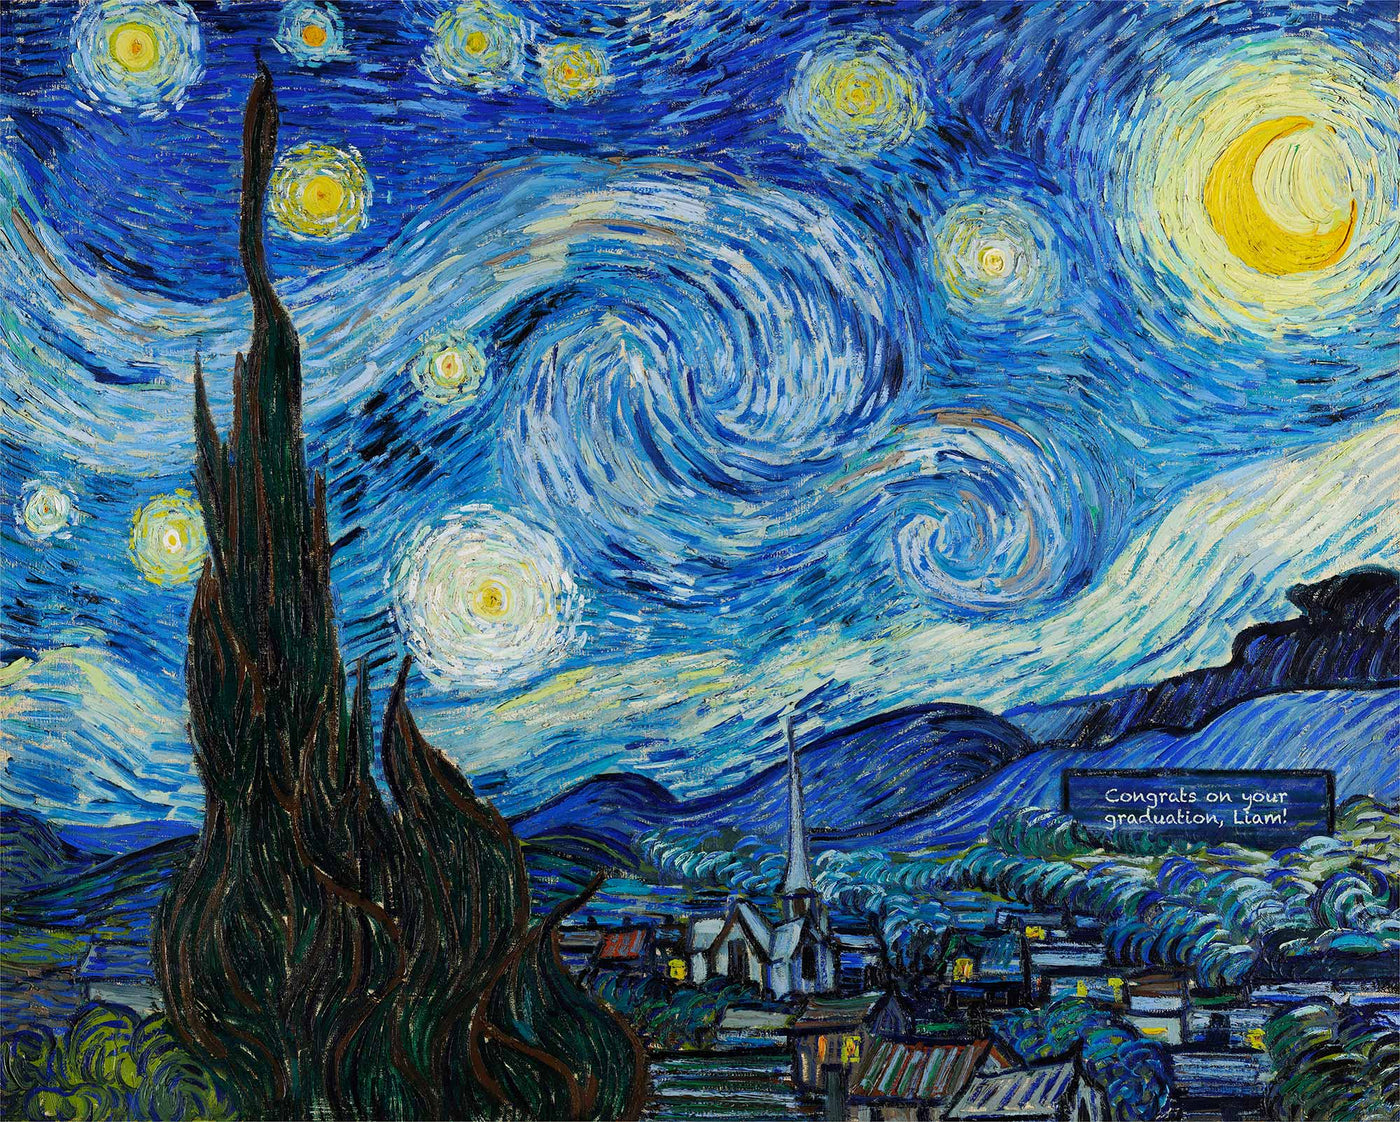 The Starry Night by Vincent van Gogh, 1889